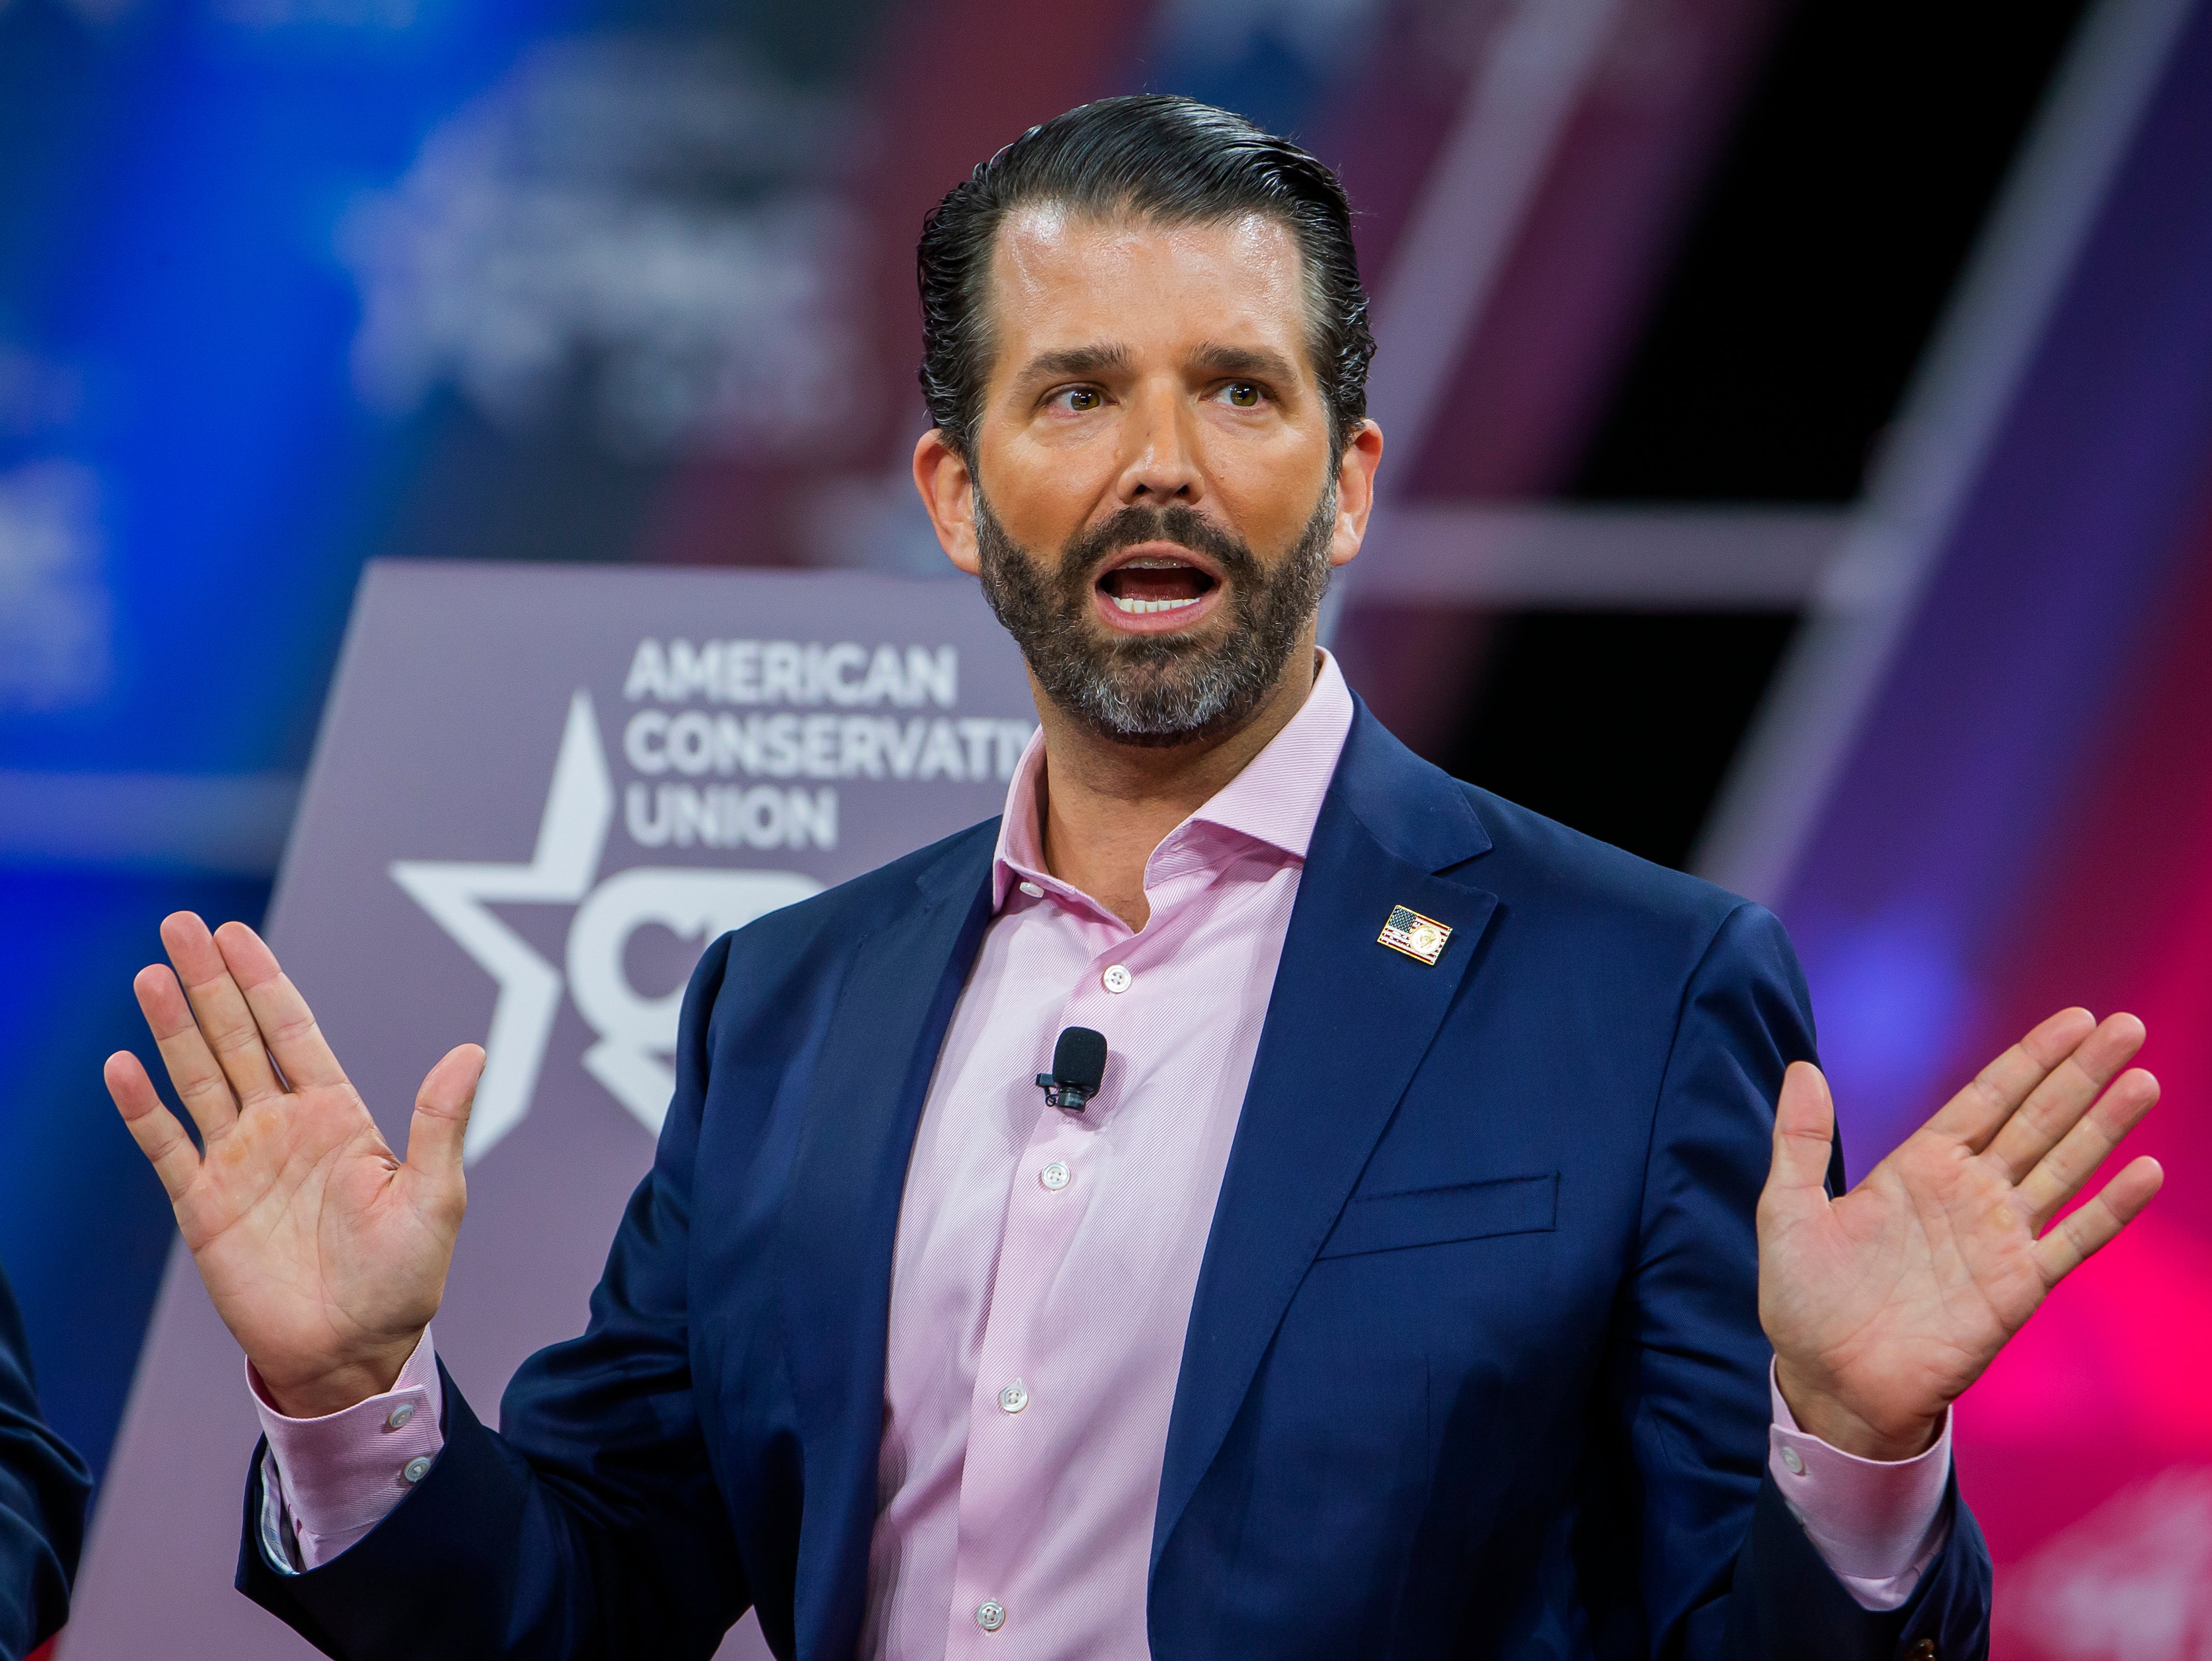 Donald Trump Jr is expected to be a popular draw